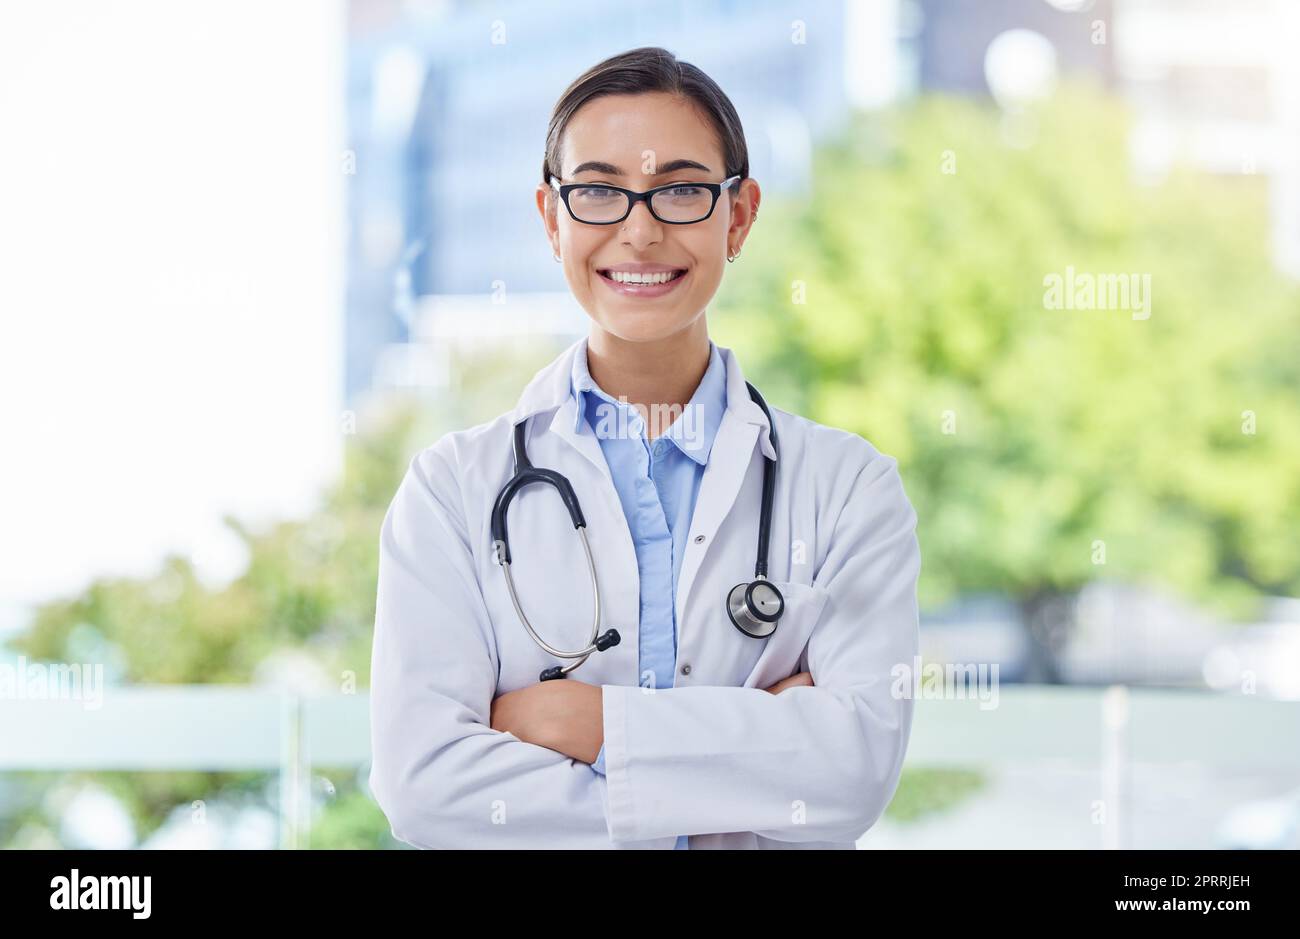 Healthcare, proud and doctor woman portrait with stethoscope in a hospital with bokeh and lens flare. Care, trust and mission of a young medical professional expert or worker with wellness motivation Stock Photo